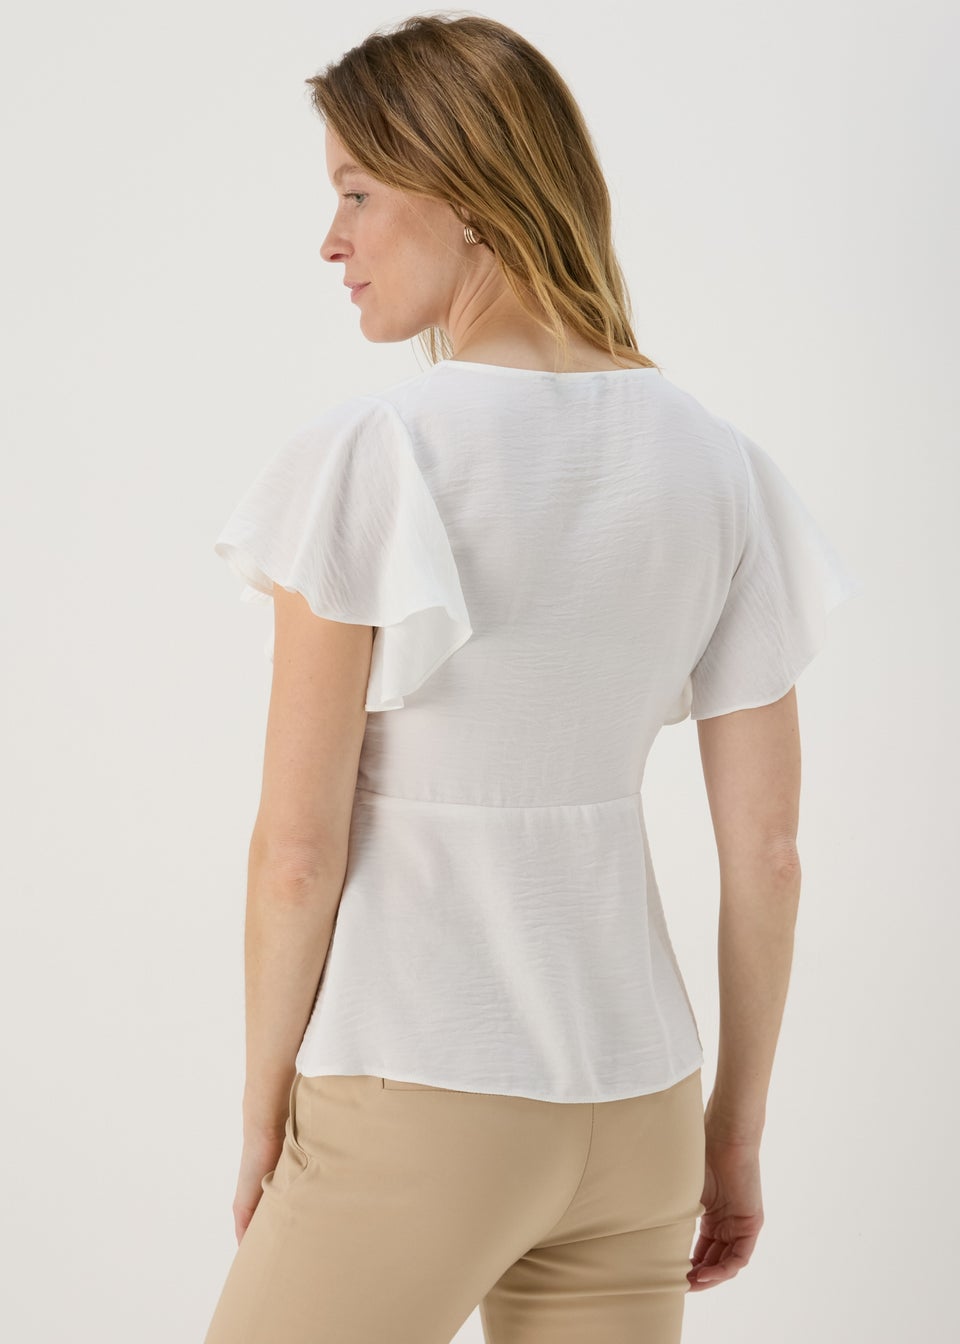 Et Vous White Angel Sleeve Airflow Blouse Top